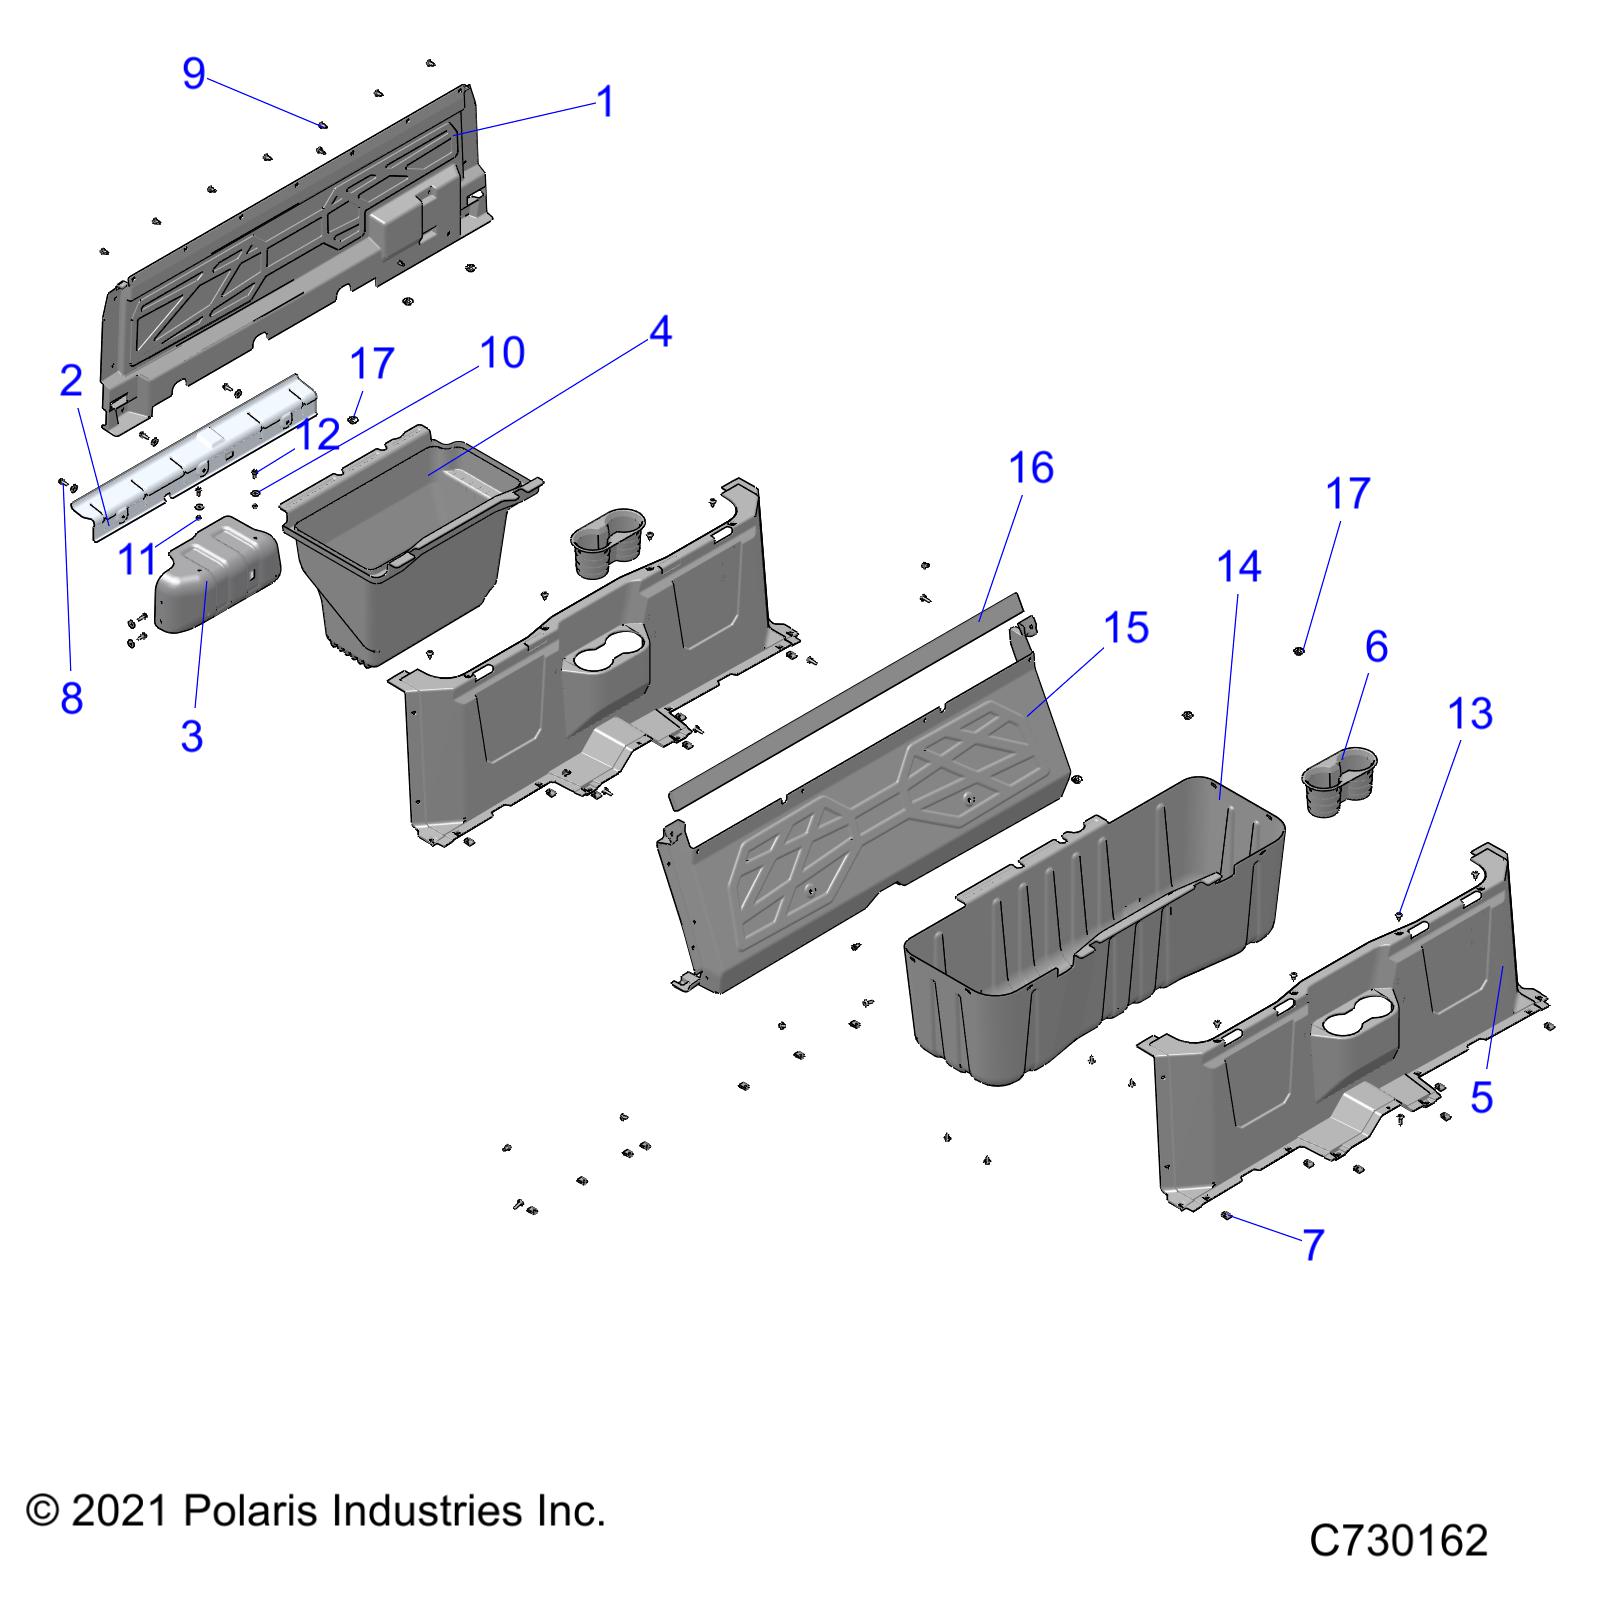 Part Number : 5271045 SHIELD-HEAT  CLOSE-OFF